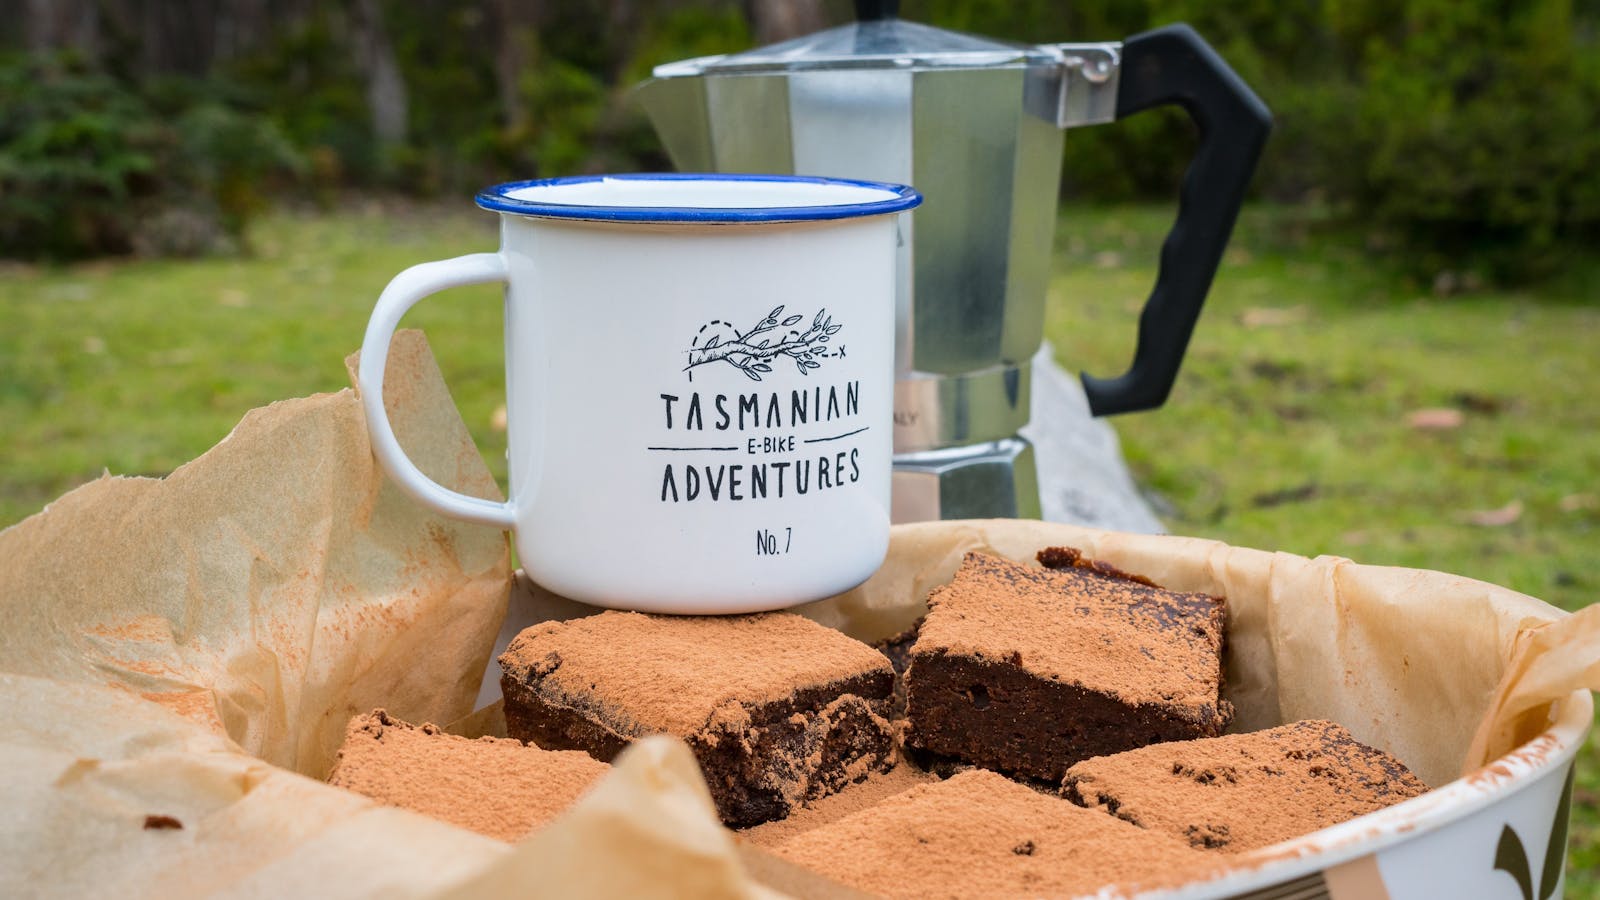 Enjoy delicious Tasmanian gourmet style picnic catering throughout the day!